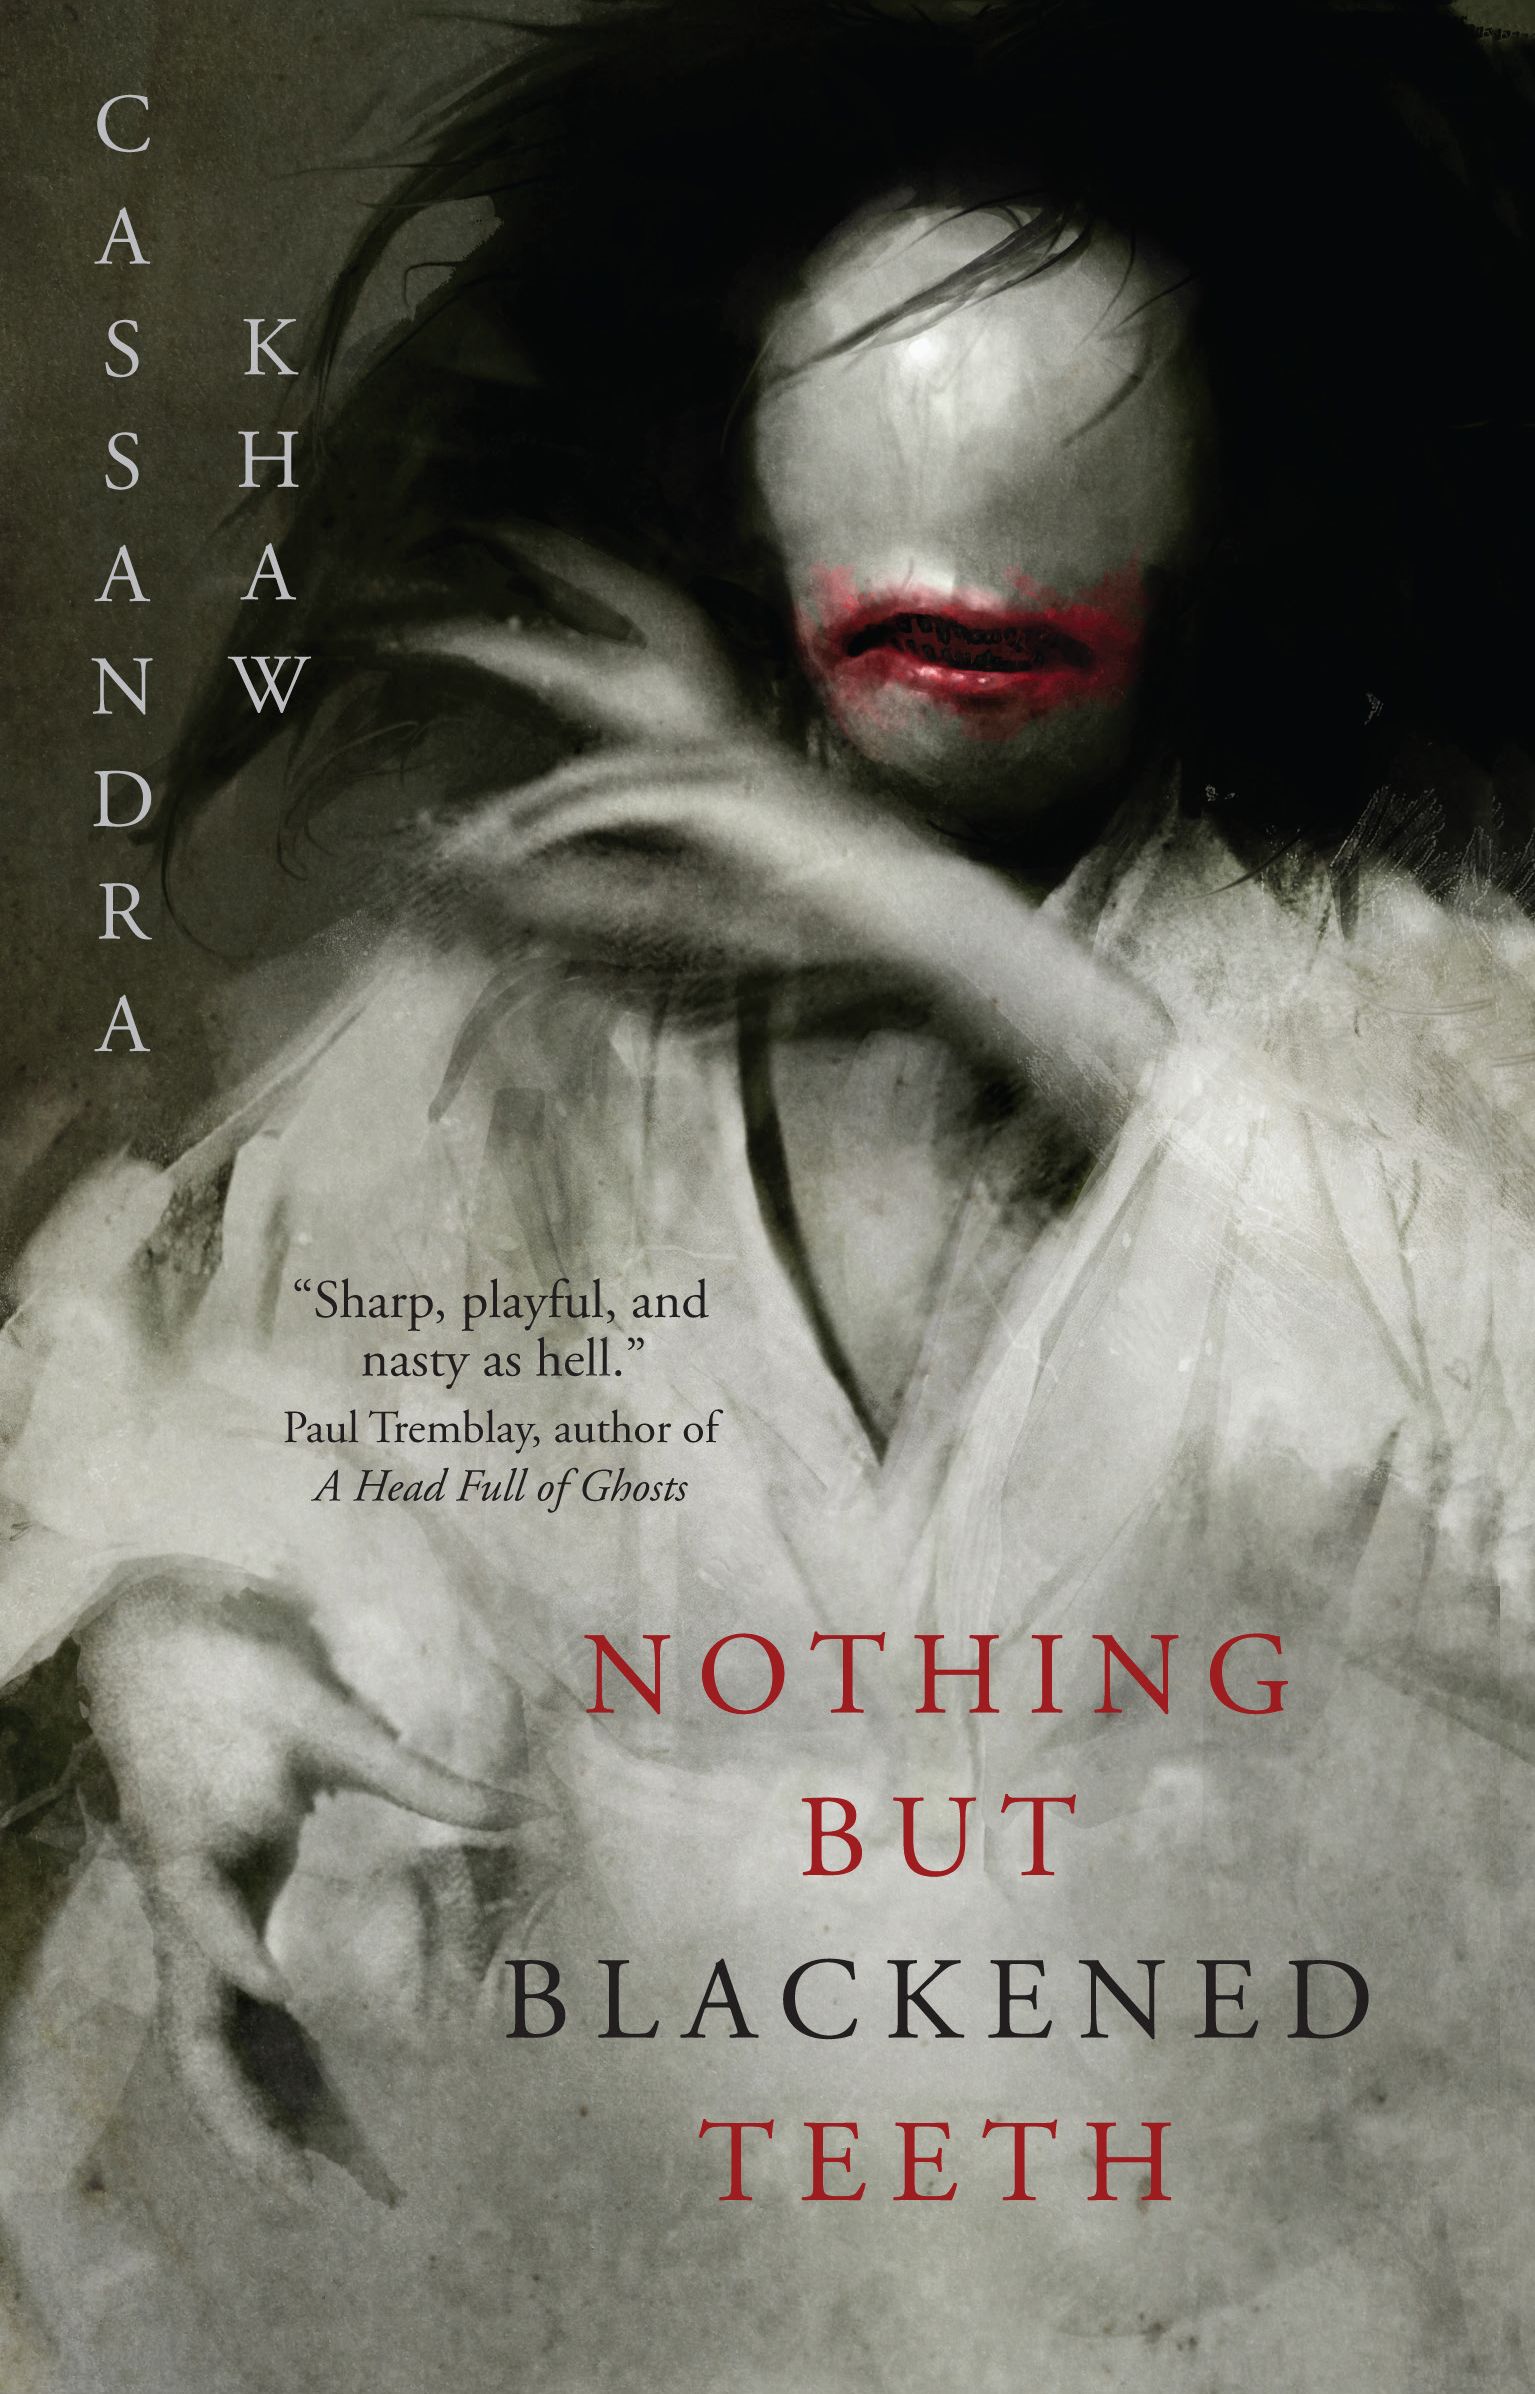 Cover of Nothing But Blackened Teeth by Cassandra Khaw